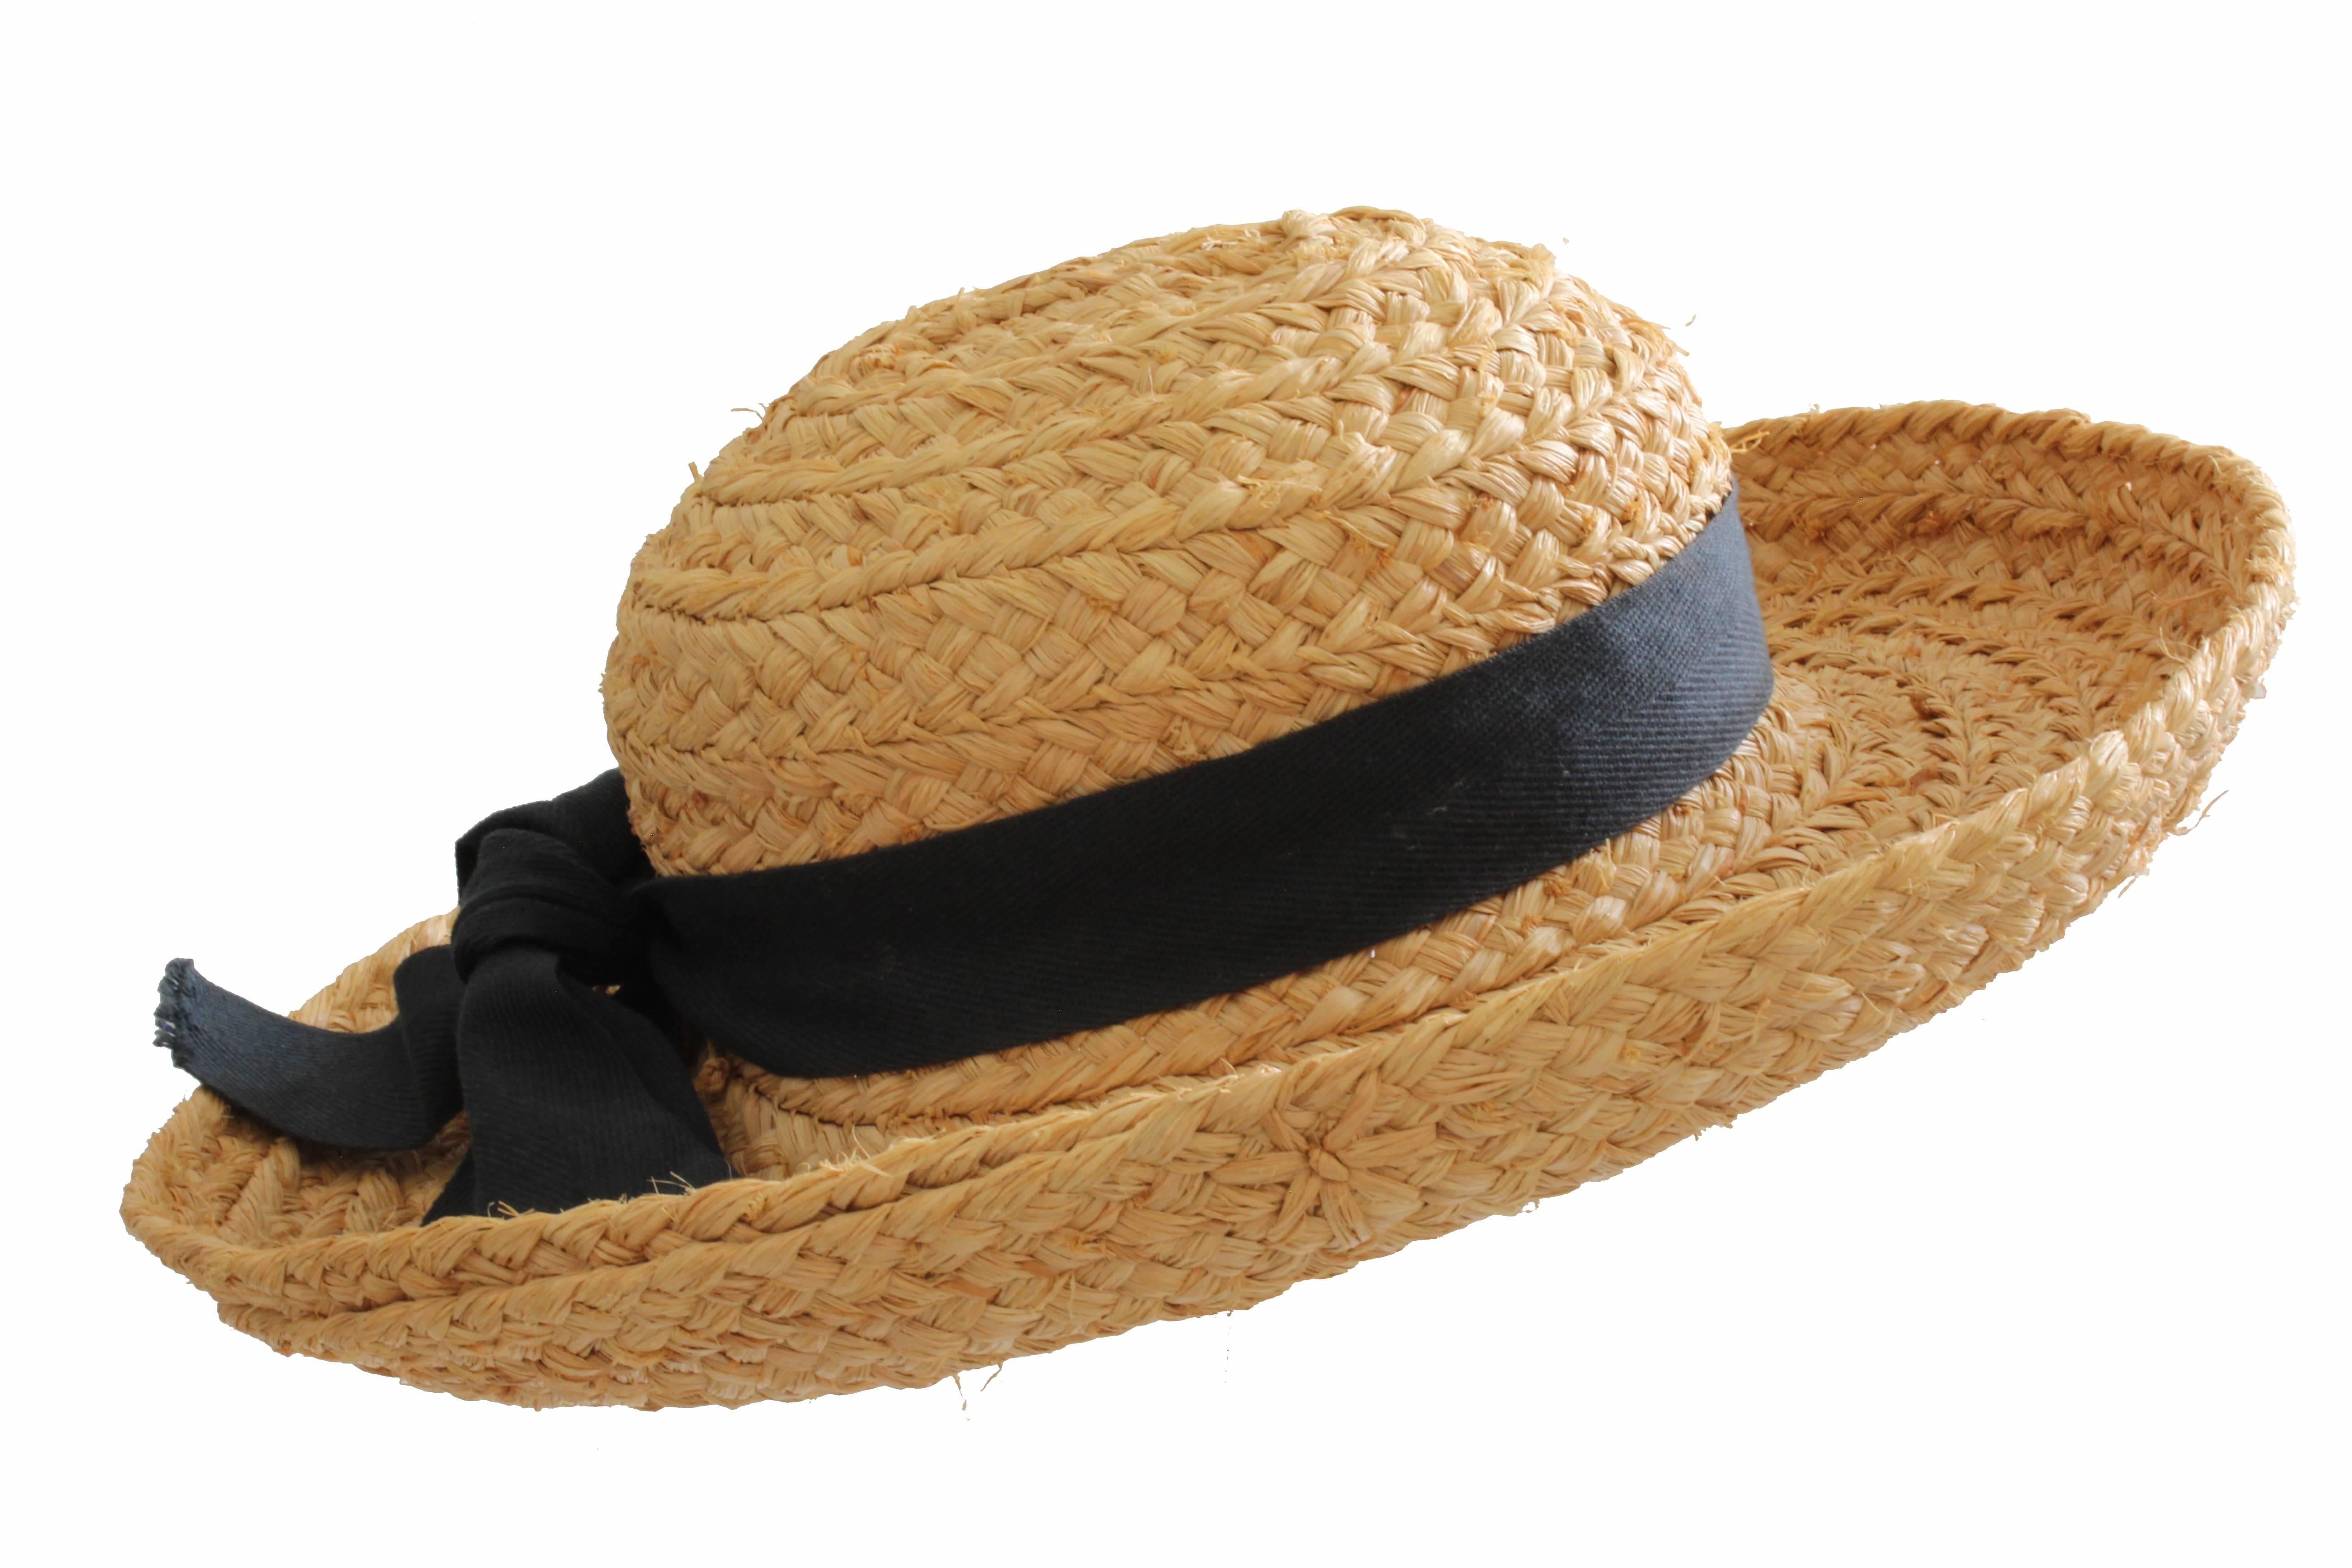 This classic straw hat was handmade in Madagascar for Helen Kaminski of Australia, the brand known for their intricate woven hat designs and now owned by the Bollman Hat Company.  Made in the 1990s, this hat features hand plaited wide braid